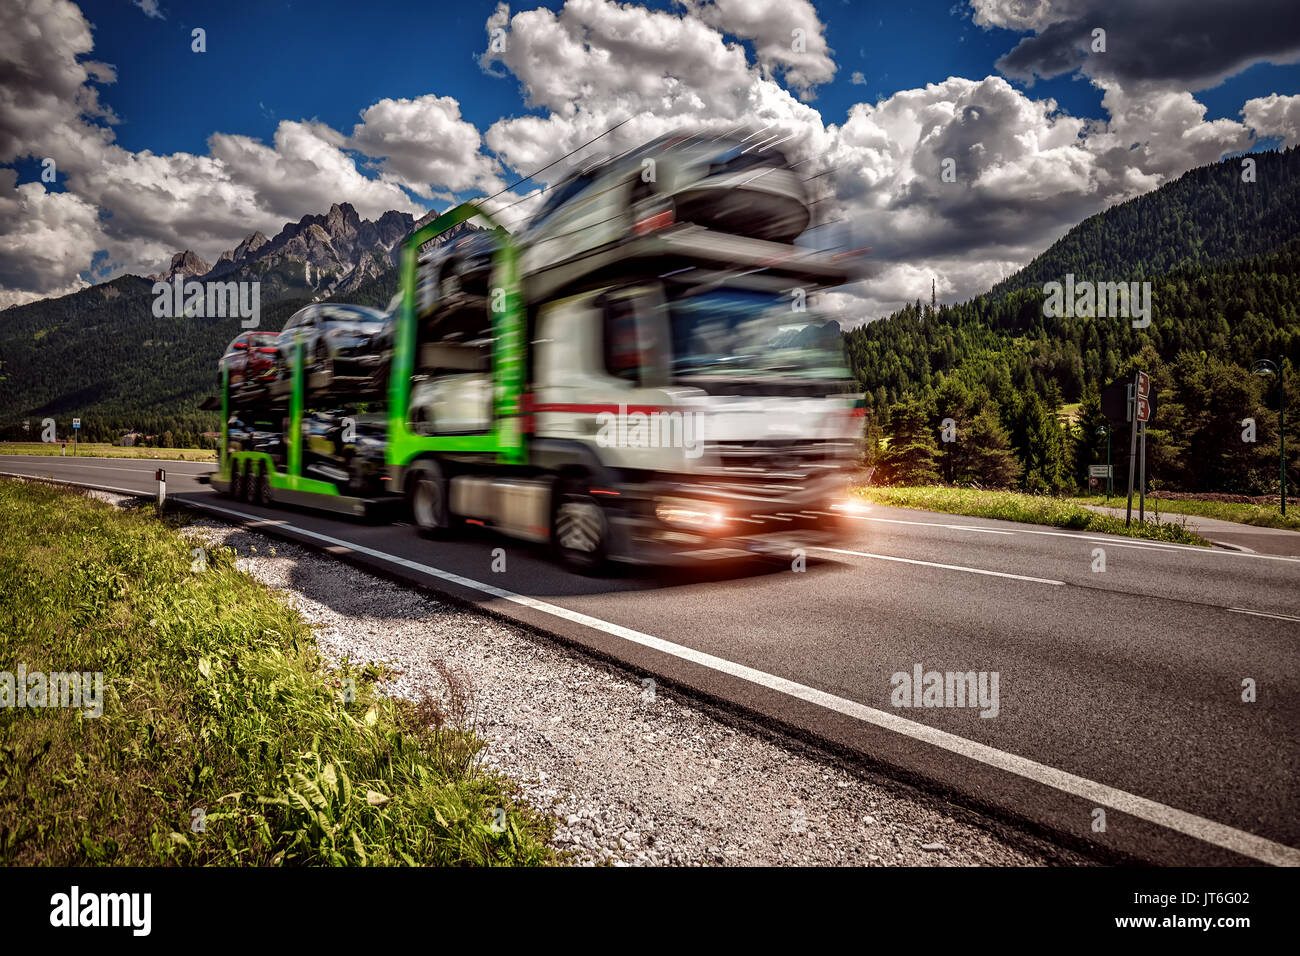 Truck trailer transports new cars rides on highway Stock Photo